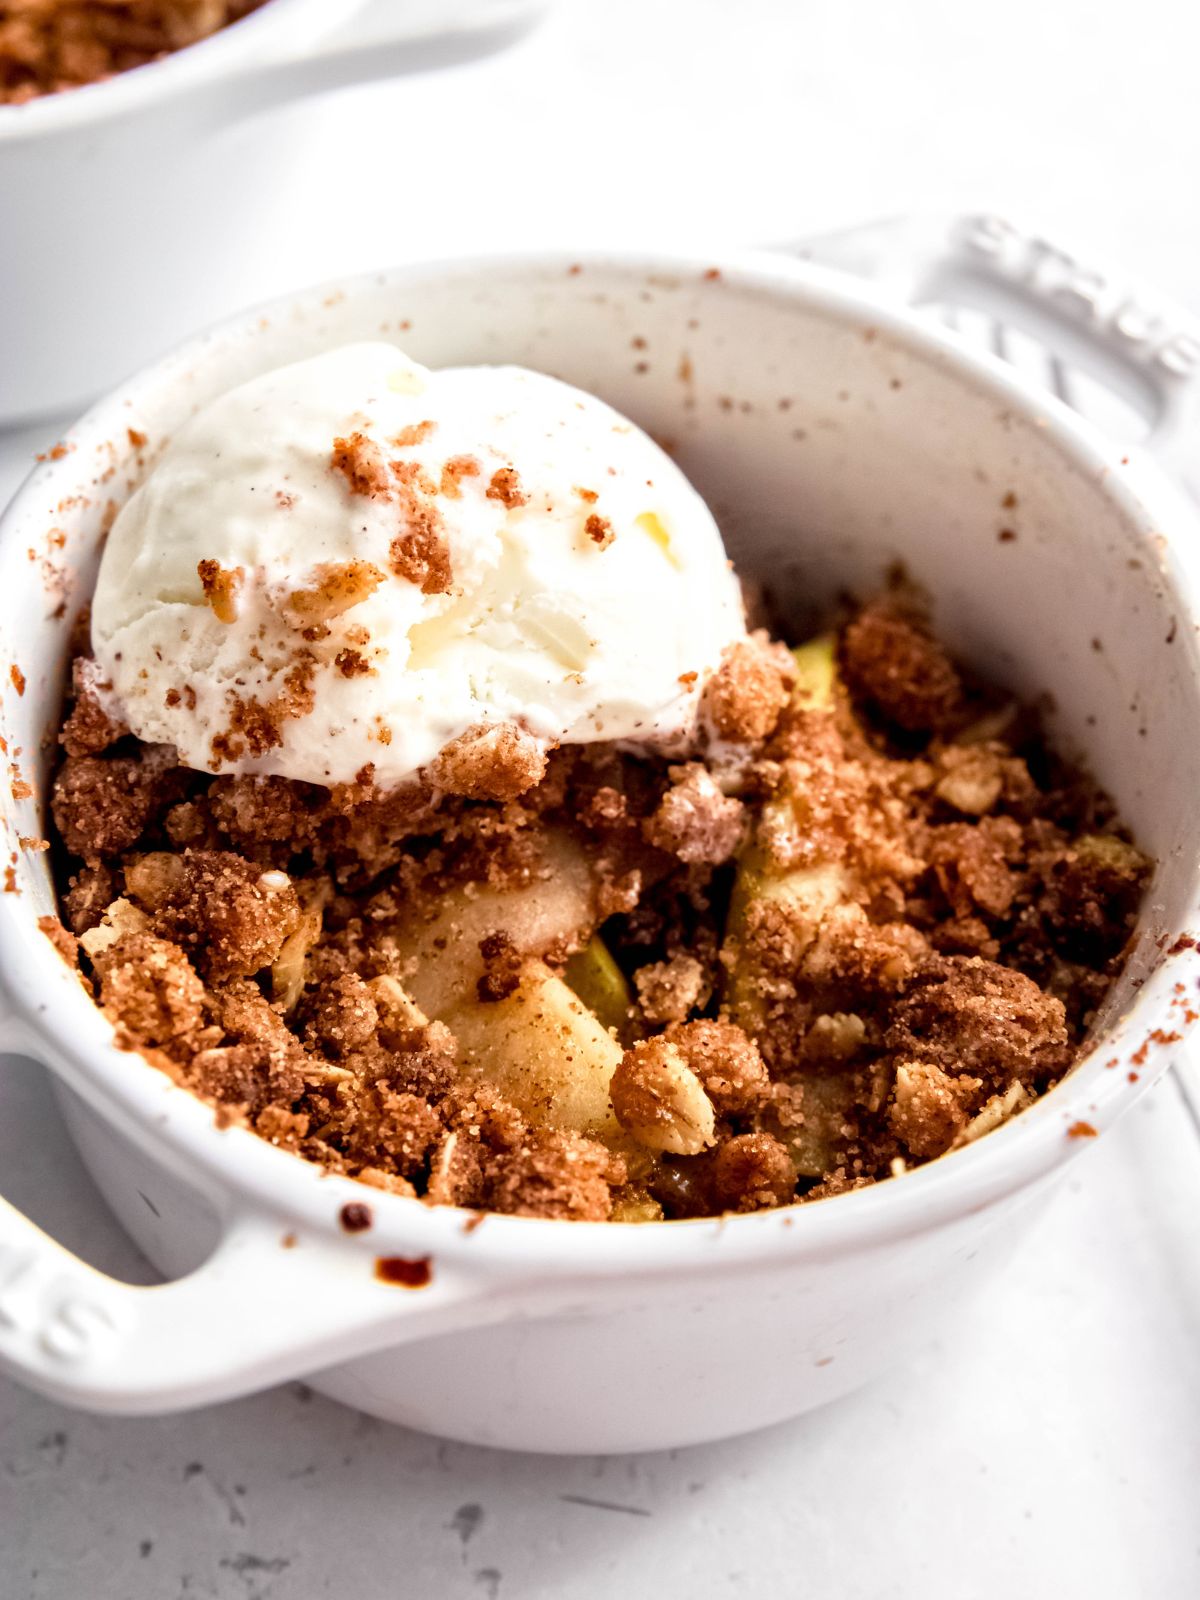 Angled shot of a dish of air fryer apple crisp with a scoop of ice cream.